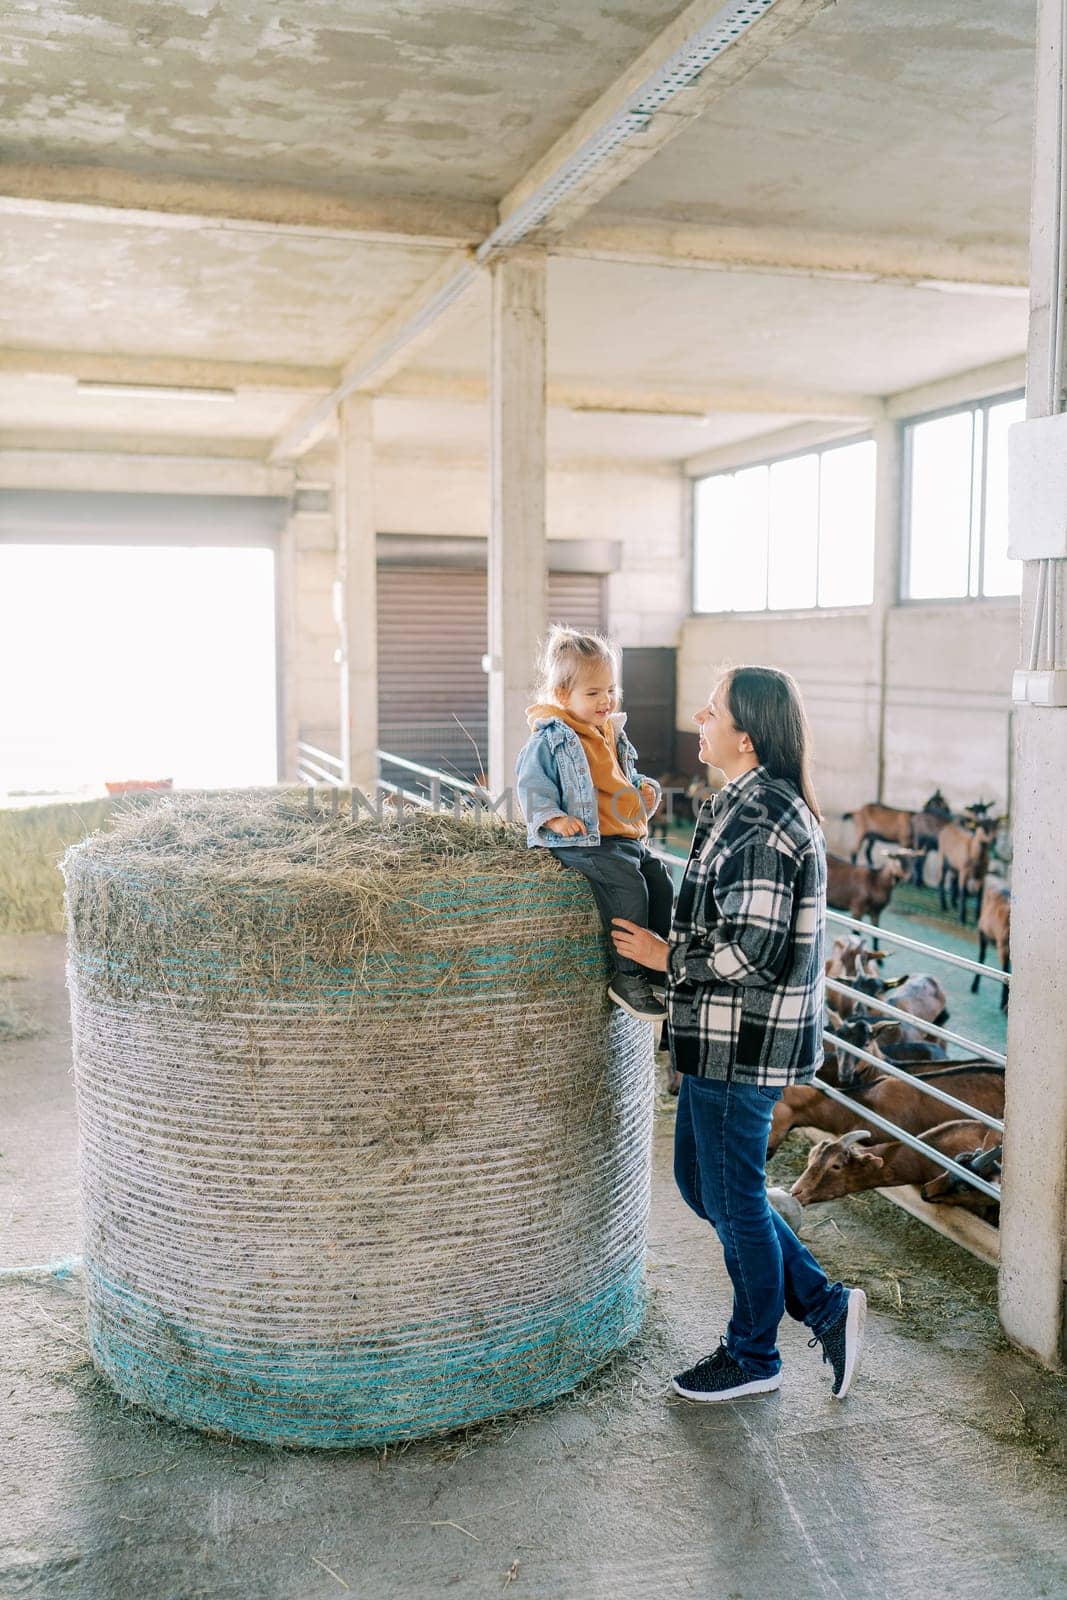 Mom stands next to a little girl sitting on a round haystack near the goat pens. High quality photo